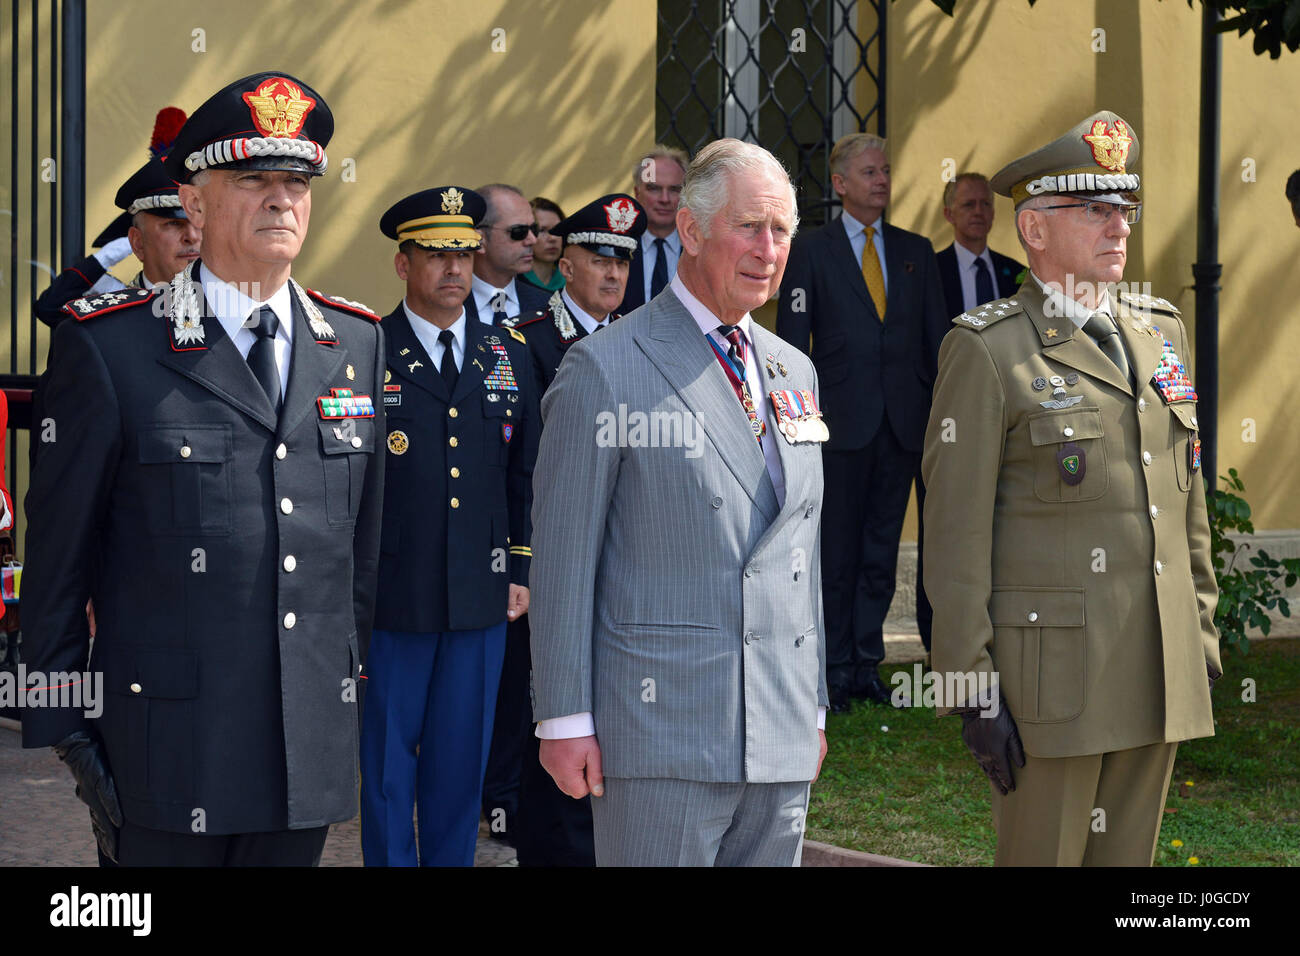 The Royal Highness, Prince Charles, Prince of Wales (center), Gen. Claudio Graziano, Italian Army Chief of Staff (right) and Gen. Tullio Del Sette, Italian Carabinieri General Commander (left), receive salute of honor at the end of the visit at Center of Excellence for Stability Police Units (CoESPU) Vicenza, Italy, April 1, 2017. (U.S. Army Photo by Visual Information Specialist Paolo Bovo/released) Stock Photo